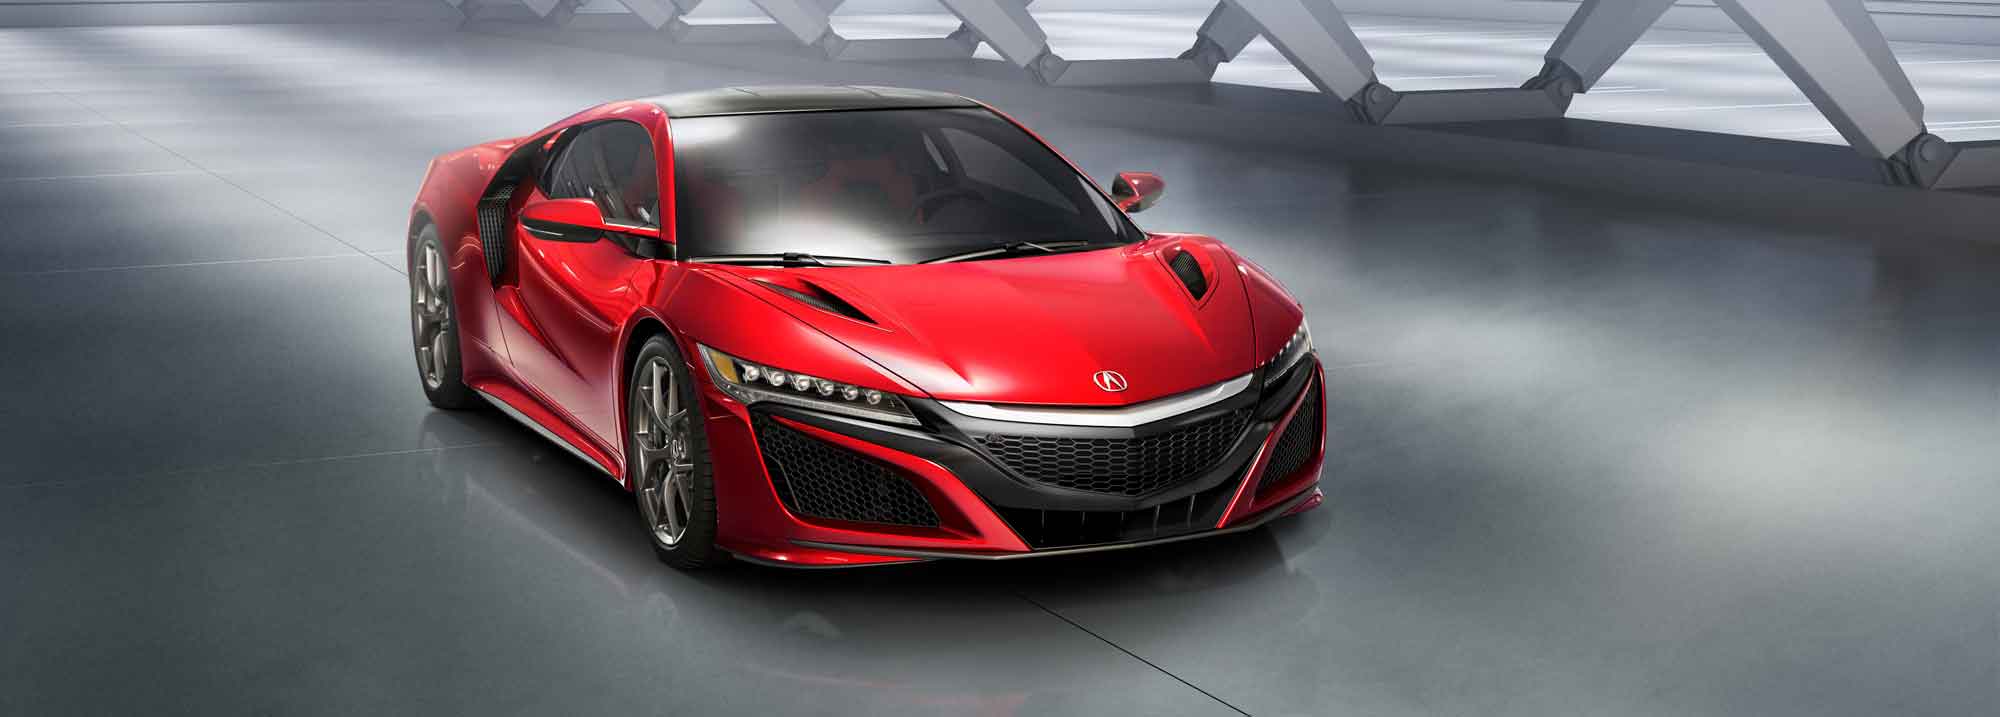 The Honda NSX: A hybrid supercar that combines speed and efficiency video-banner